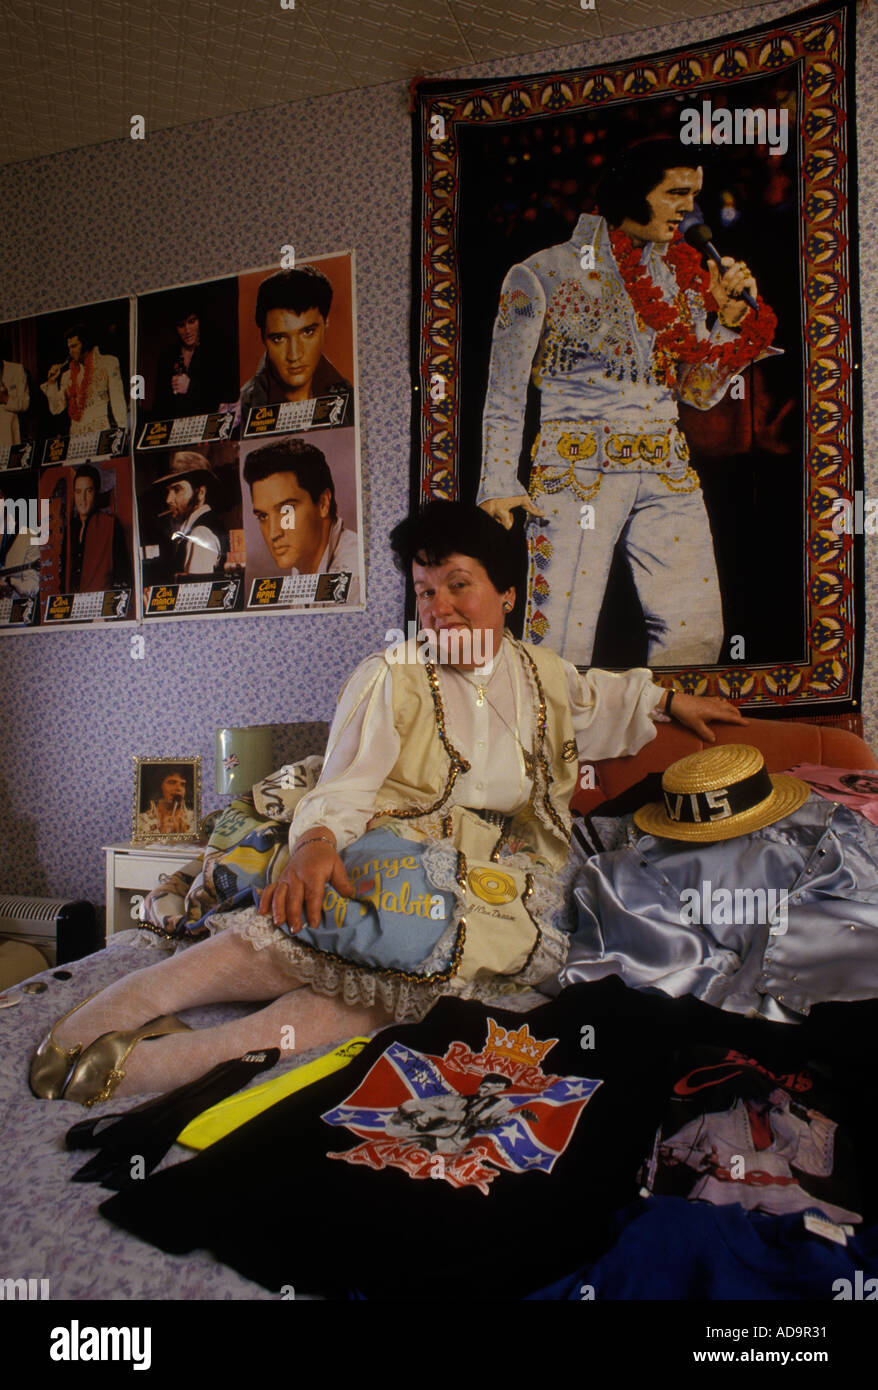 Elvis Presley fan with memorabilia and wearing an Elvis patterned dress and earrings. This is her tribute bedroom. 1990s 90s HOMER SYKES Stock Photo